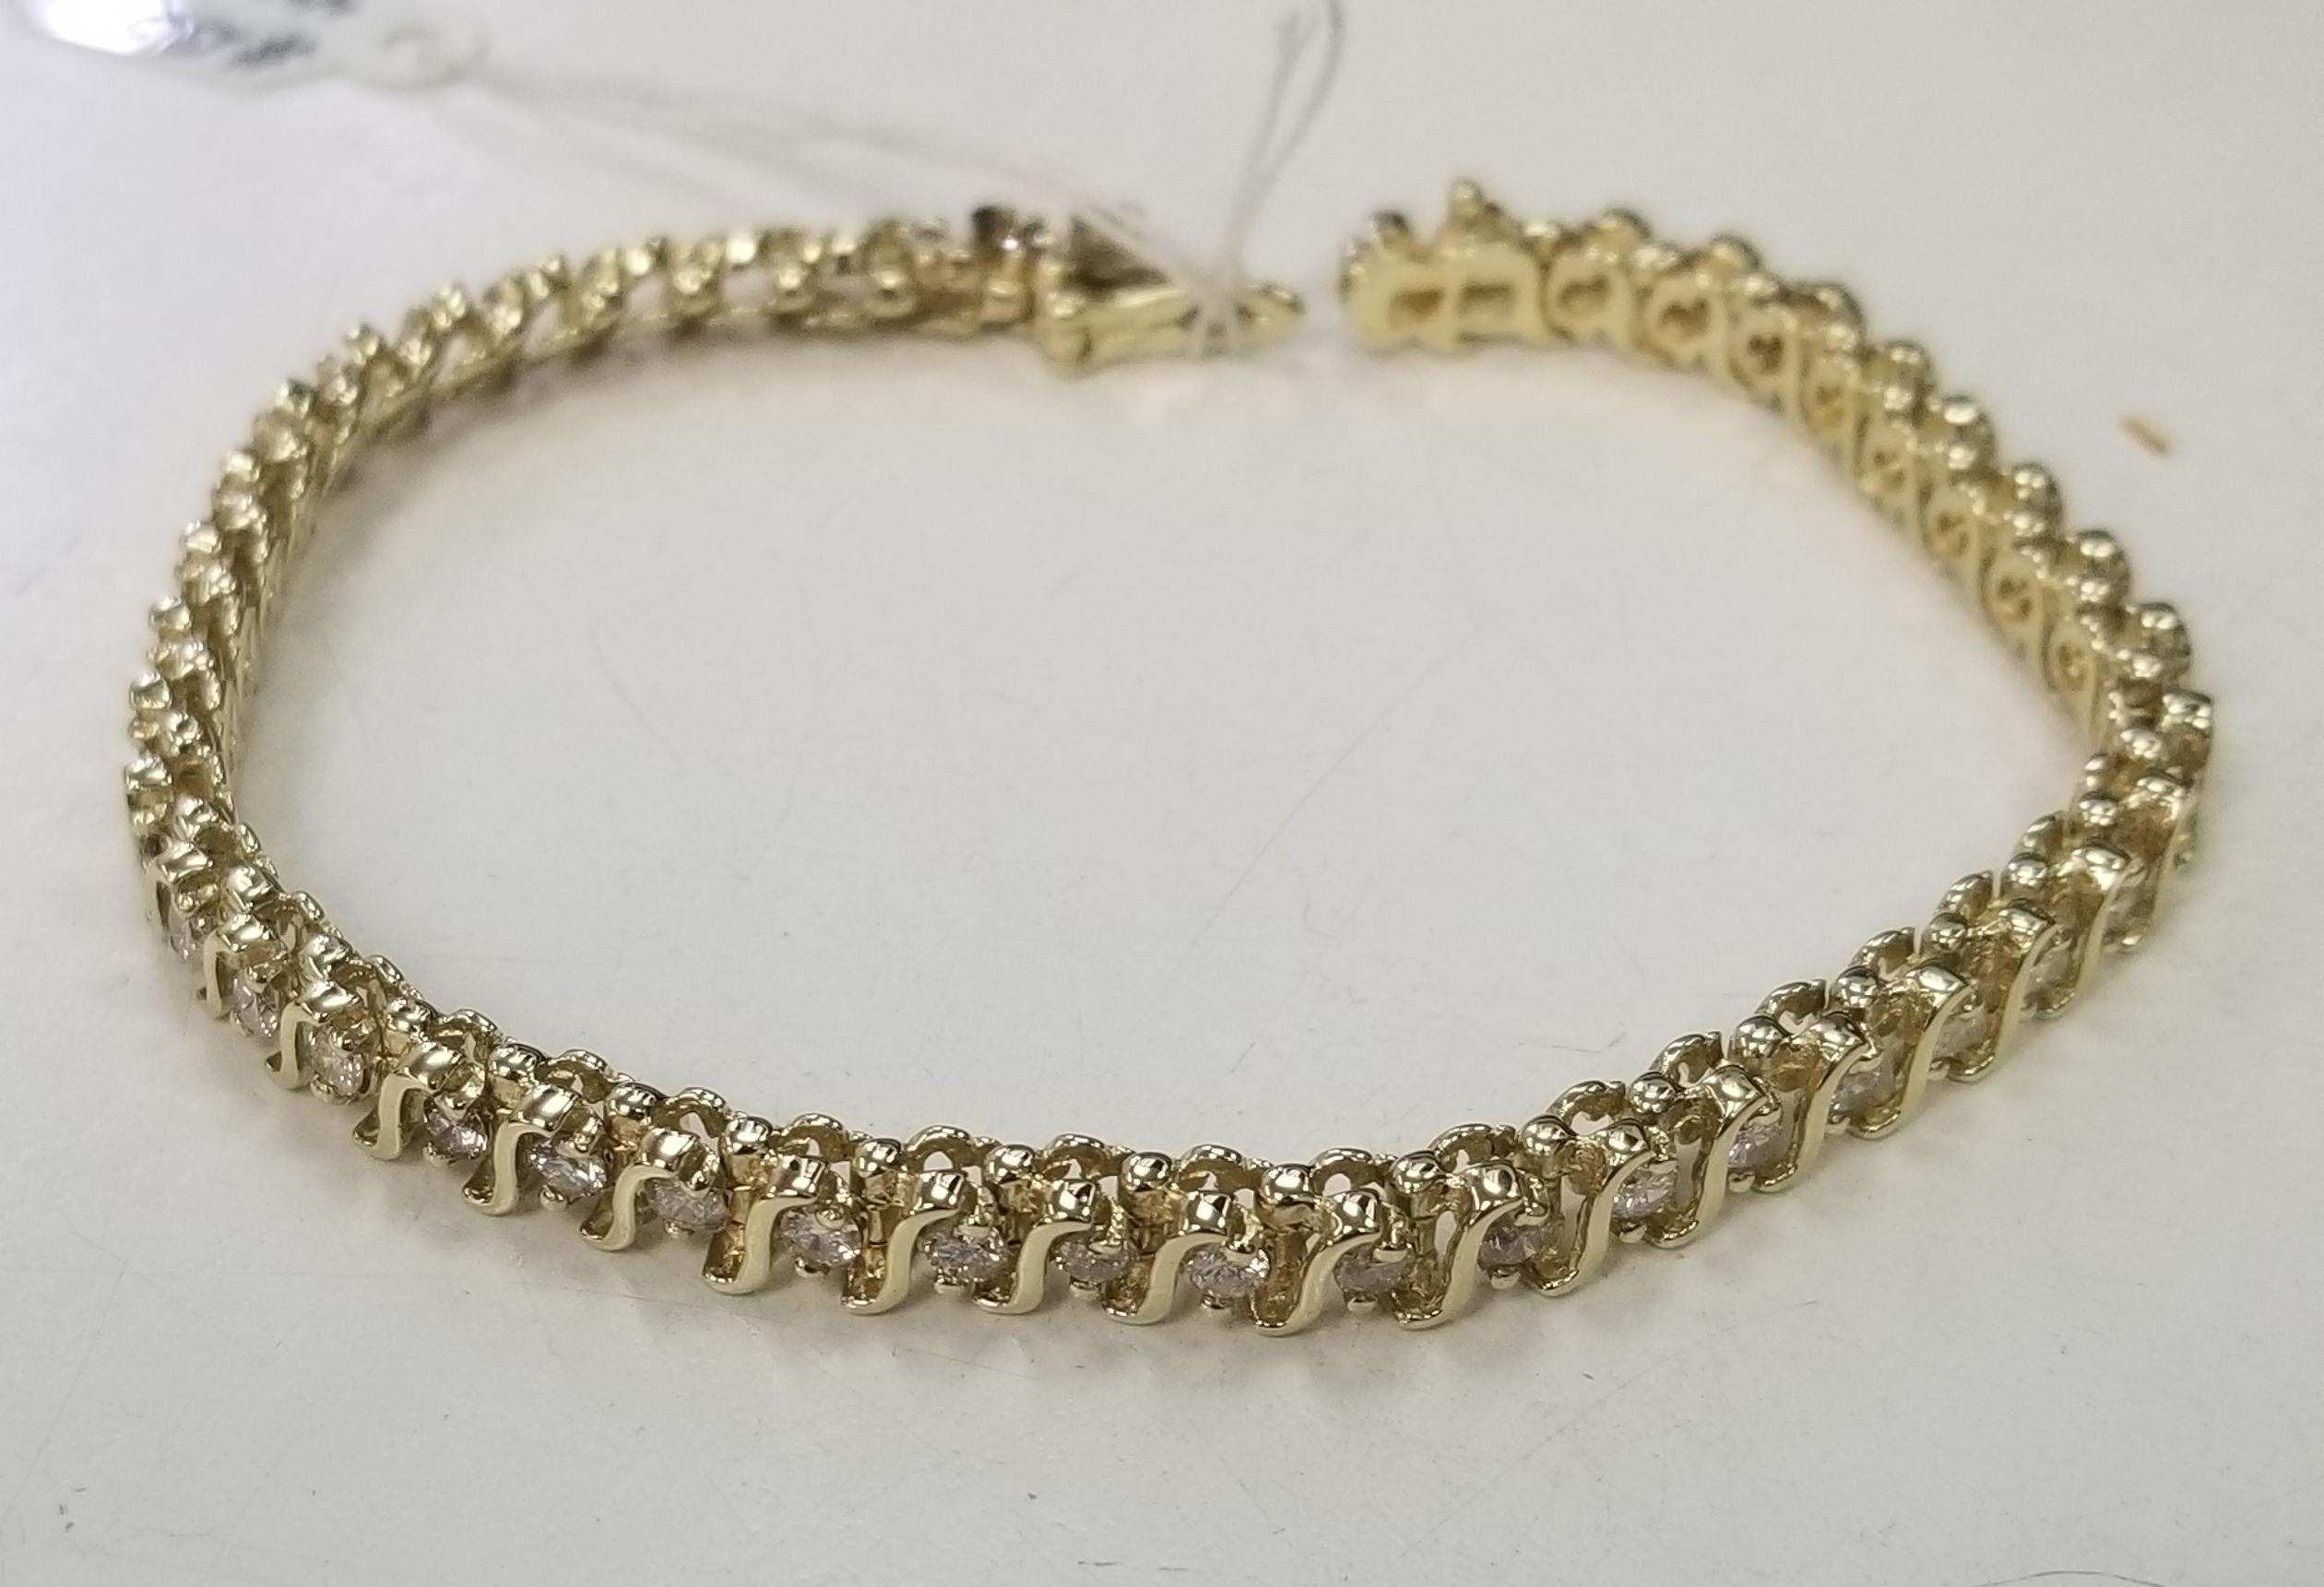 Specifications:
    main stone:ROUND DIAMONDS
    diamonds: 44 PCS
    carat total weight:approximately 3.10 CTW
    color: H-I
    clarity: SI1-SI3
    brand:CUSTOM MADE
    metal:14K yellow gold
    type:BRACELET
    weight:16.3 gr
    length:7